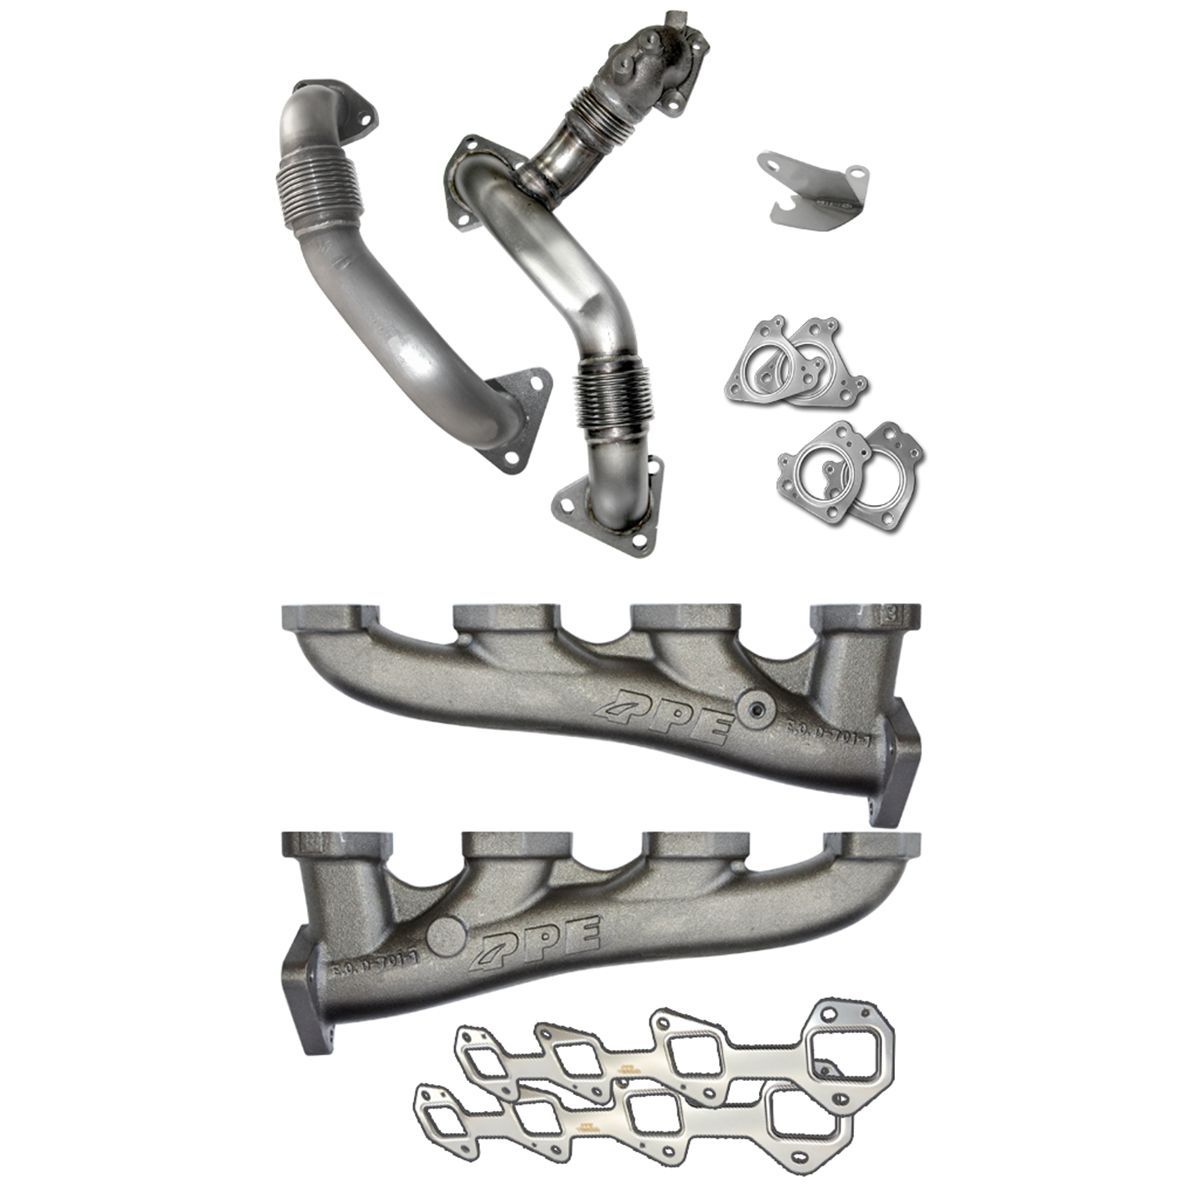 PPE - PPE High Flow Exhaust Manifolds & Up Pipes For 11-16 LML Duramax